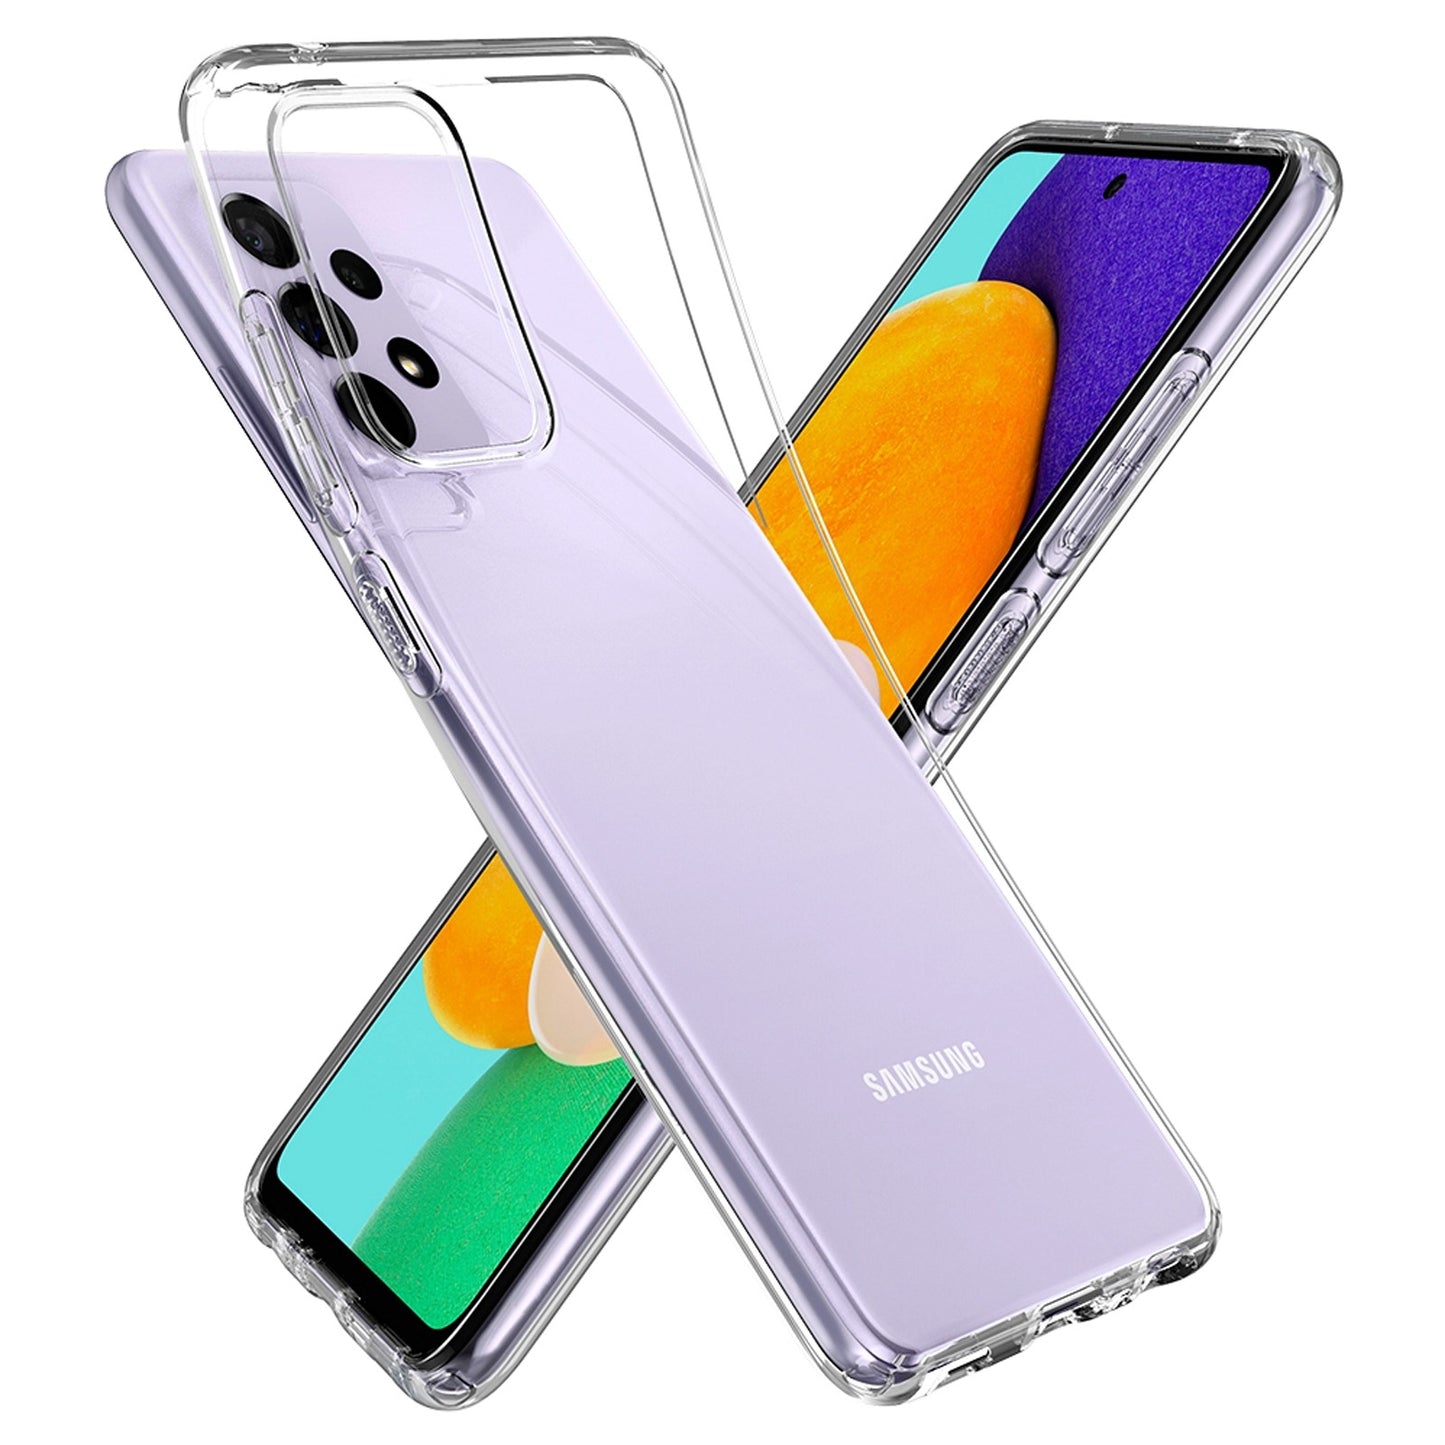 MEZON Galaxy A52s 5G Ultra Slim Crystal Clear Premium TPU Gel Back Case – Shock Absorption, Wireless Charging Compatible